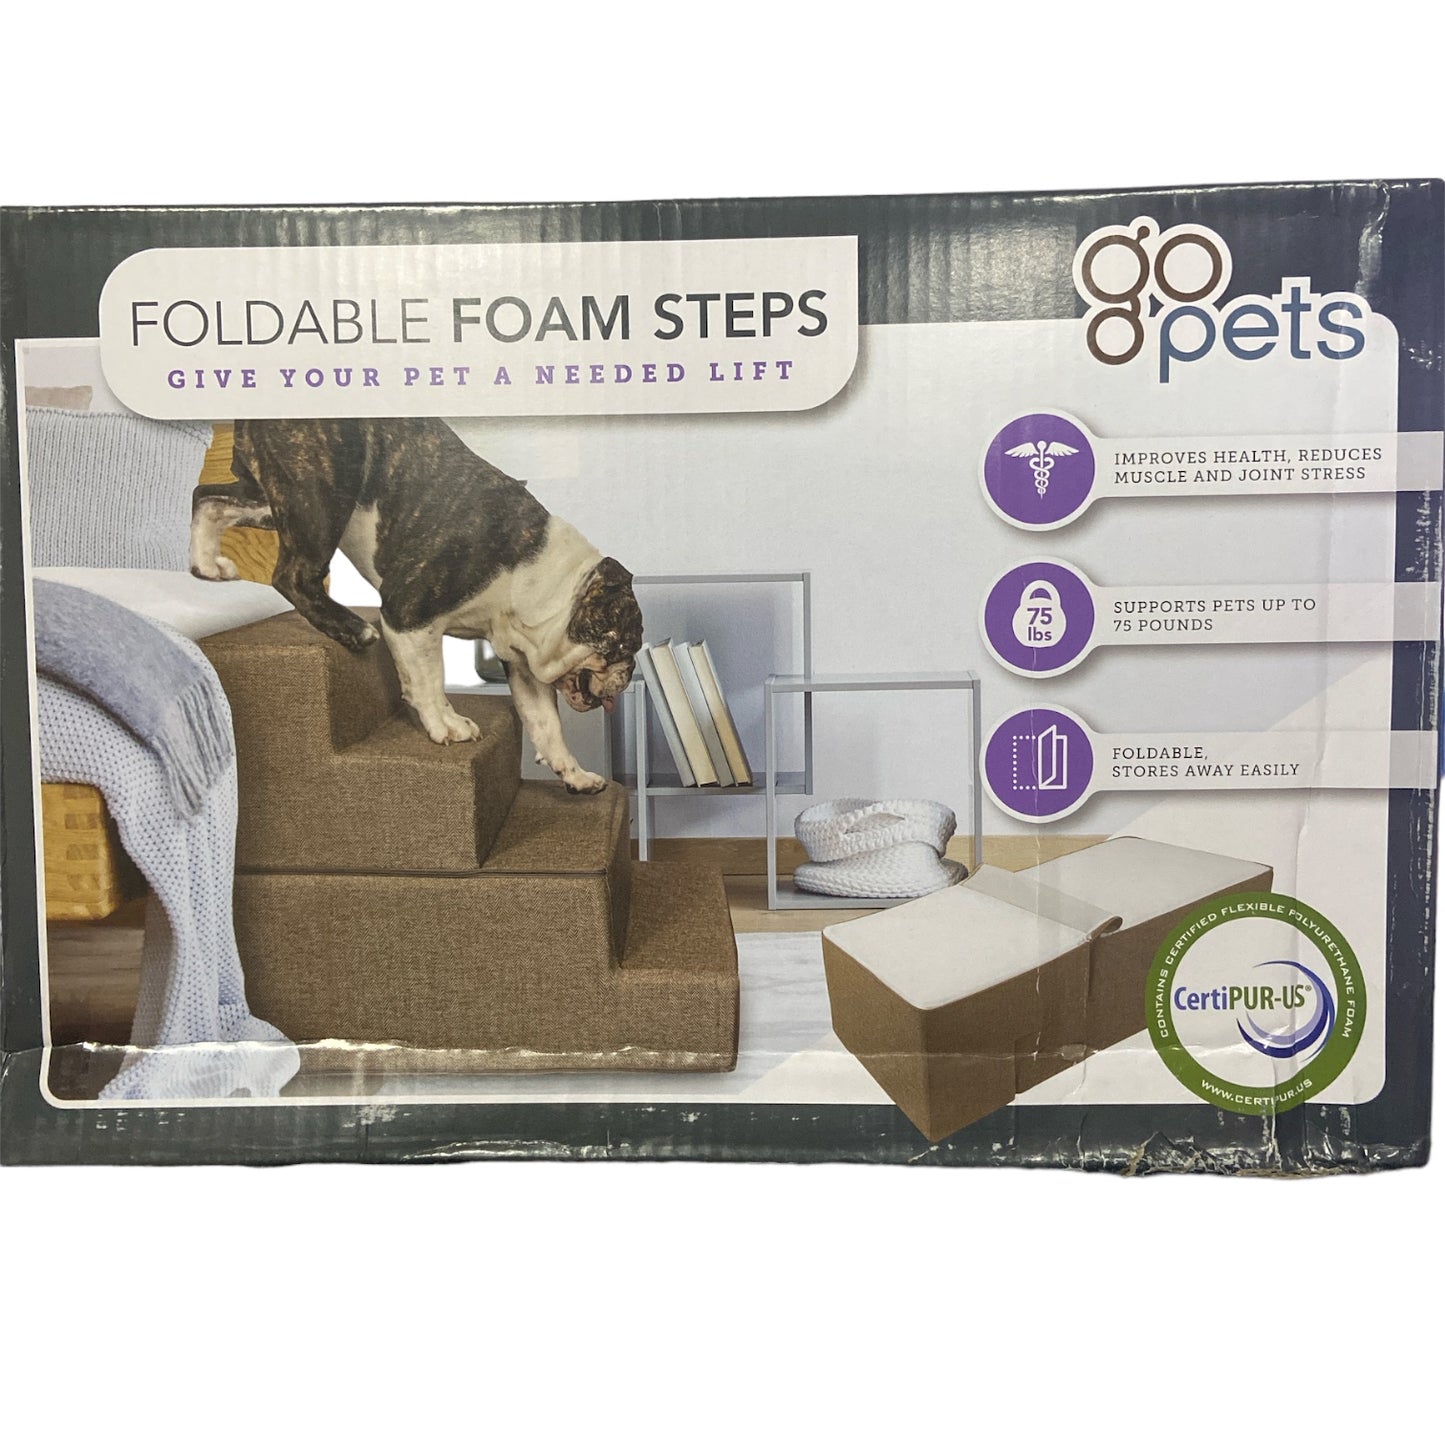 Foldable Foam Steps by Go Pets - Non Slip, Machine Washable and Up to 75lbs